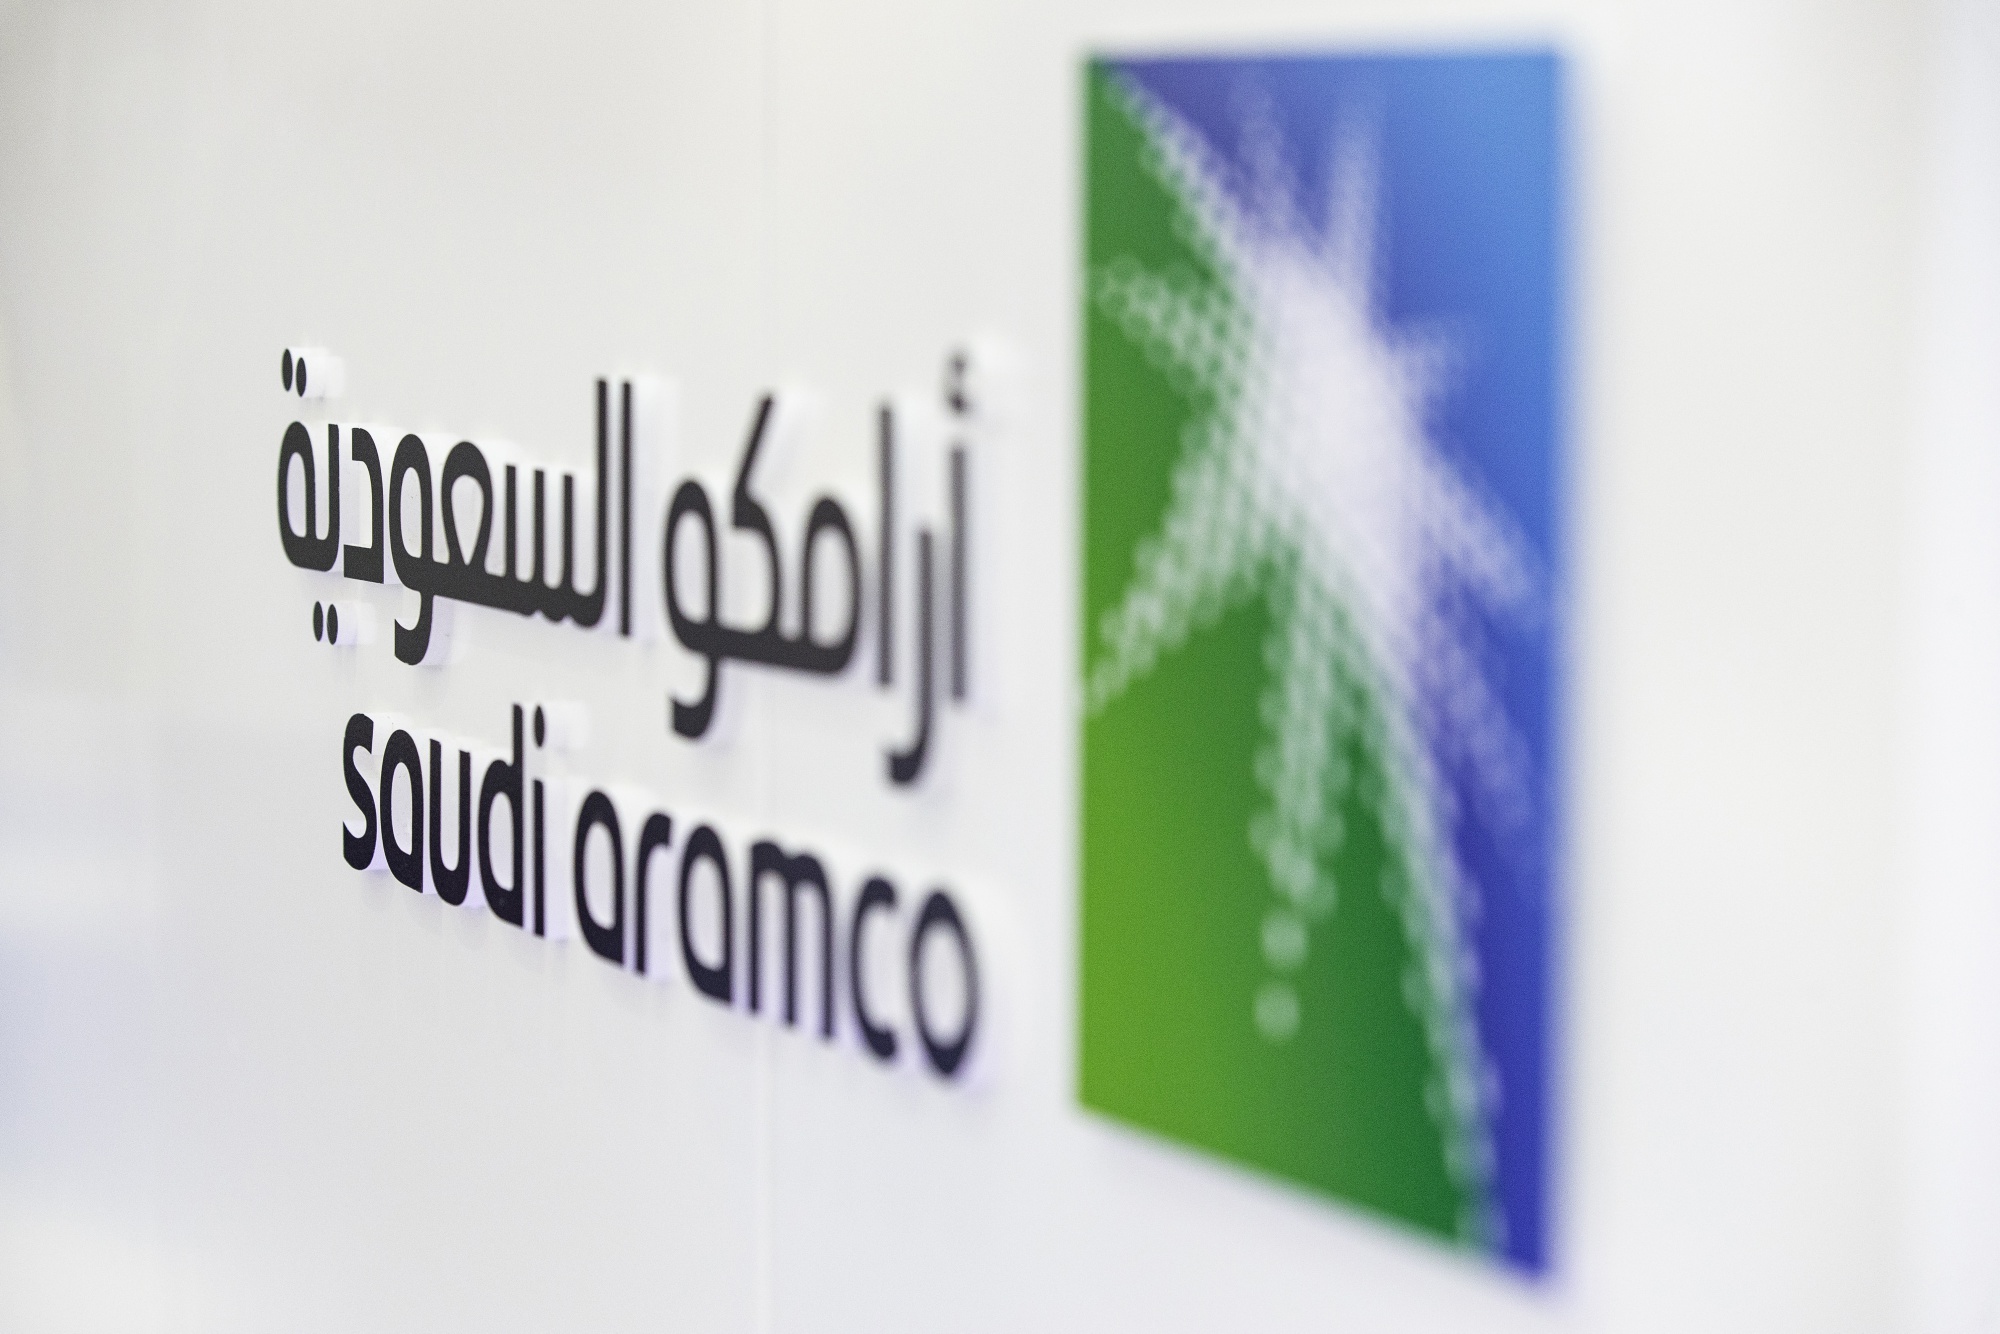 Saudi Aramco Q3 net income plummets 23% on lower oil prices